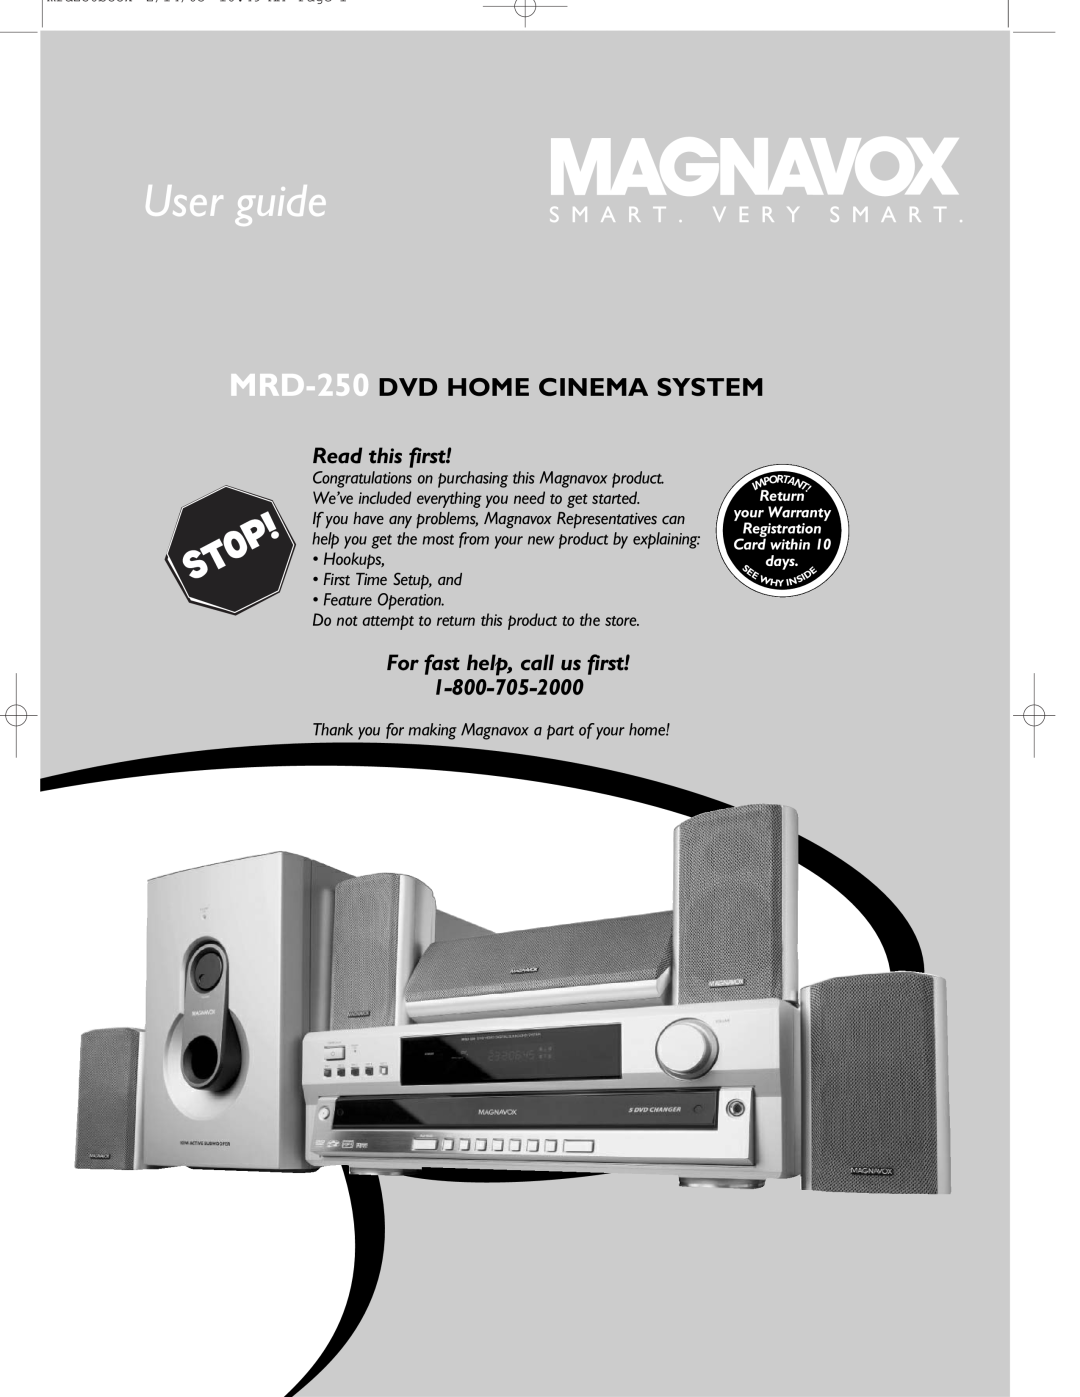 Philips warranty User guide, MRD-250 DVD HOME CINEMA SYSTEM, Read this first, Hookups First Time Setup, and, Return 